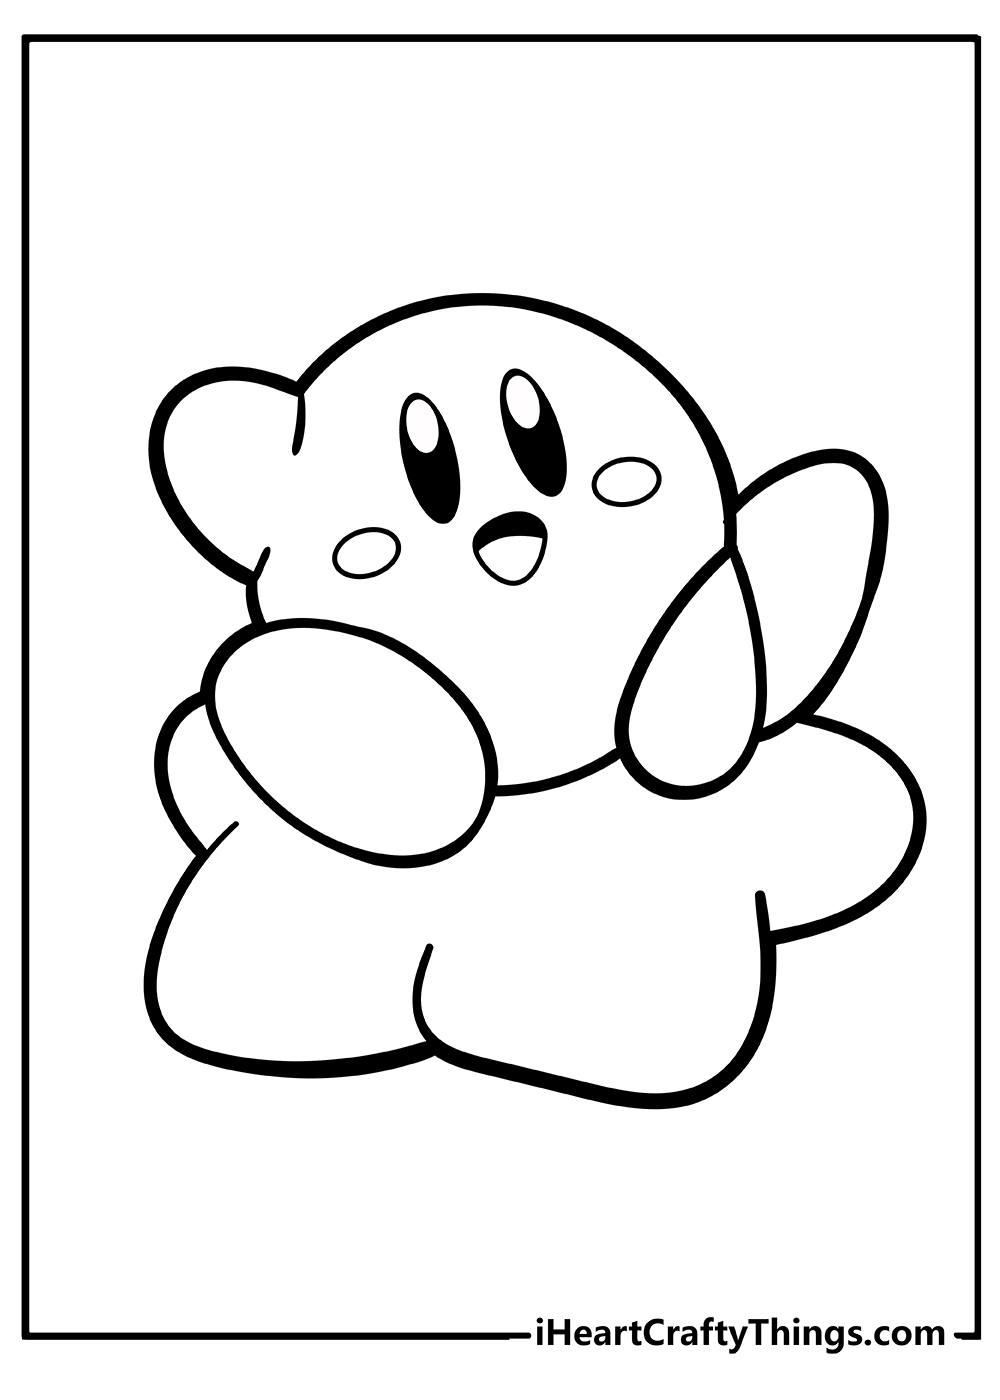 Printable Kirby Coloring Pages Updated 20